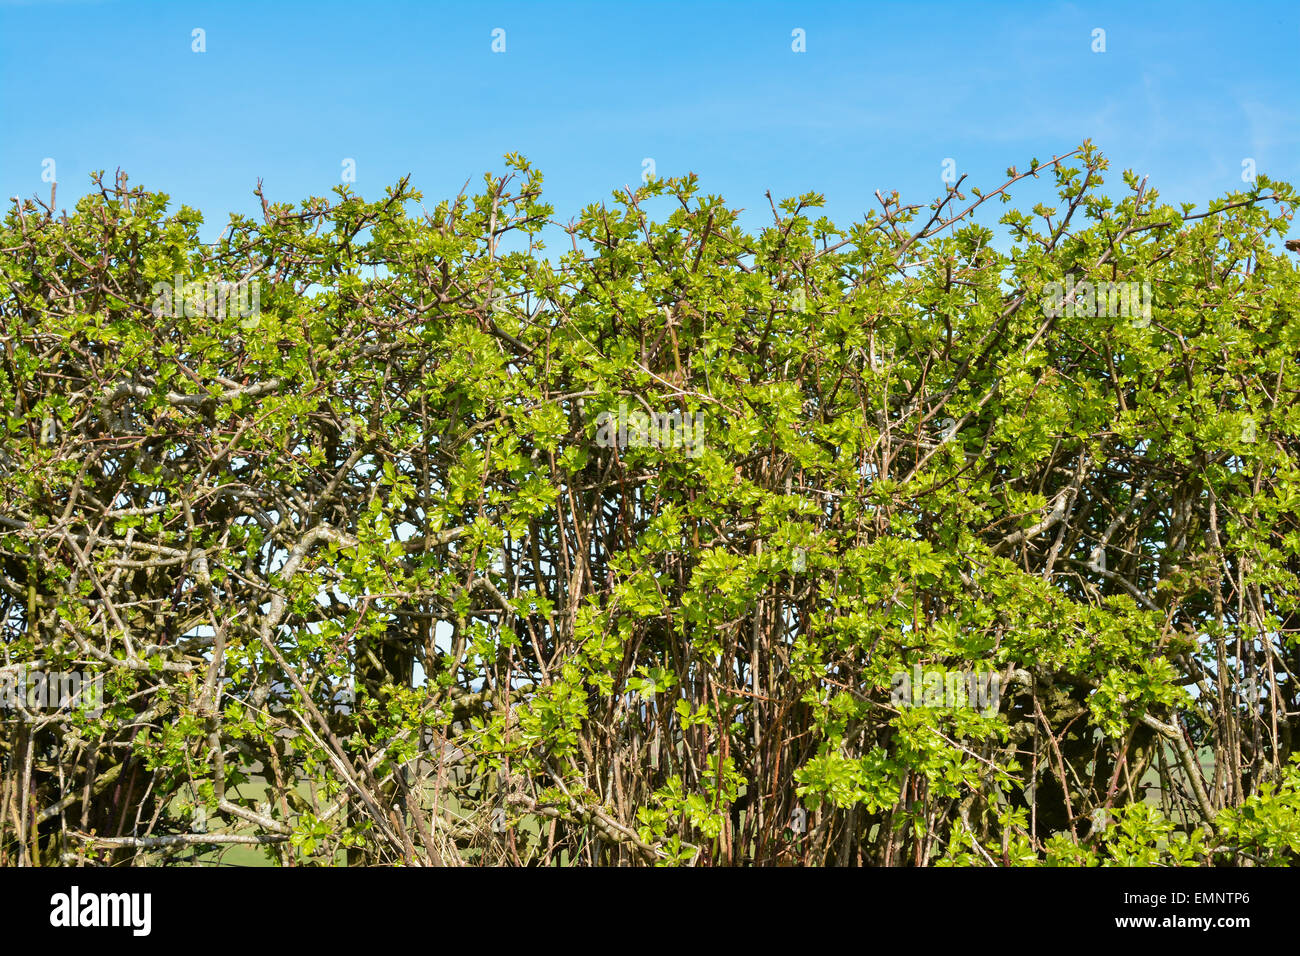 Native Hawthorn Hedge with fresh green spring leaves against blue sky Stock Photo